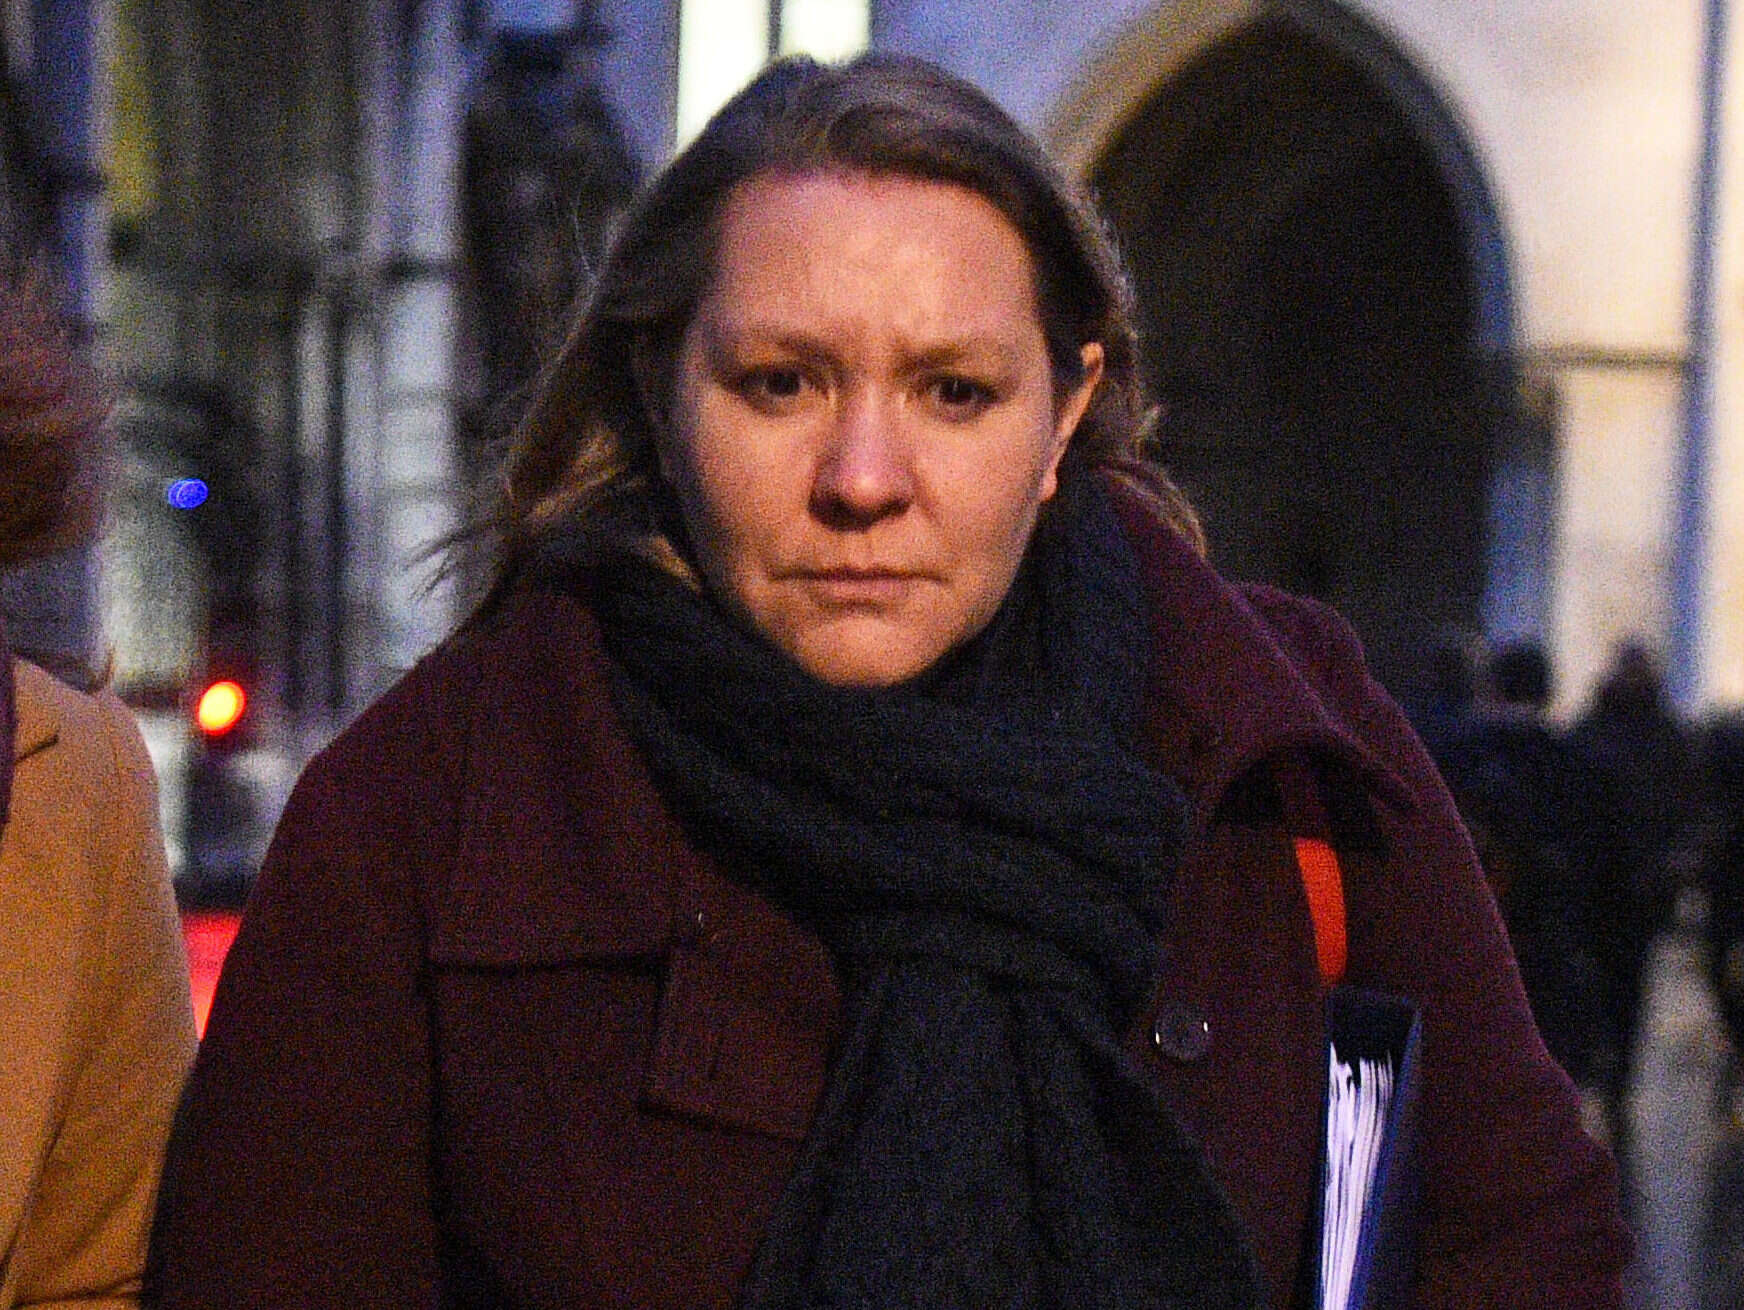 Skwawkbox owner sued by Labour candidate defends 'particularly newsworthy' story